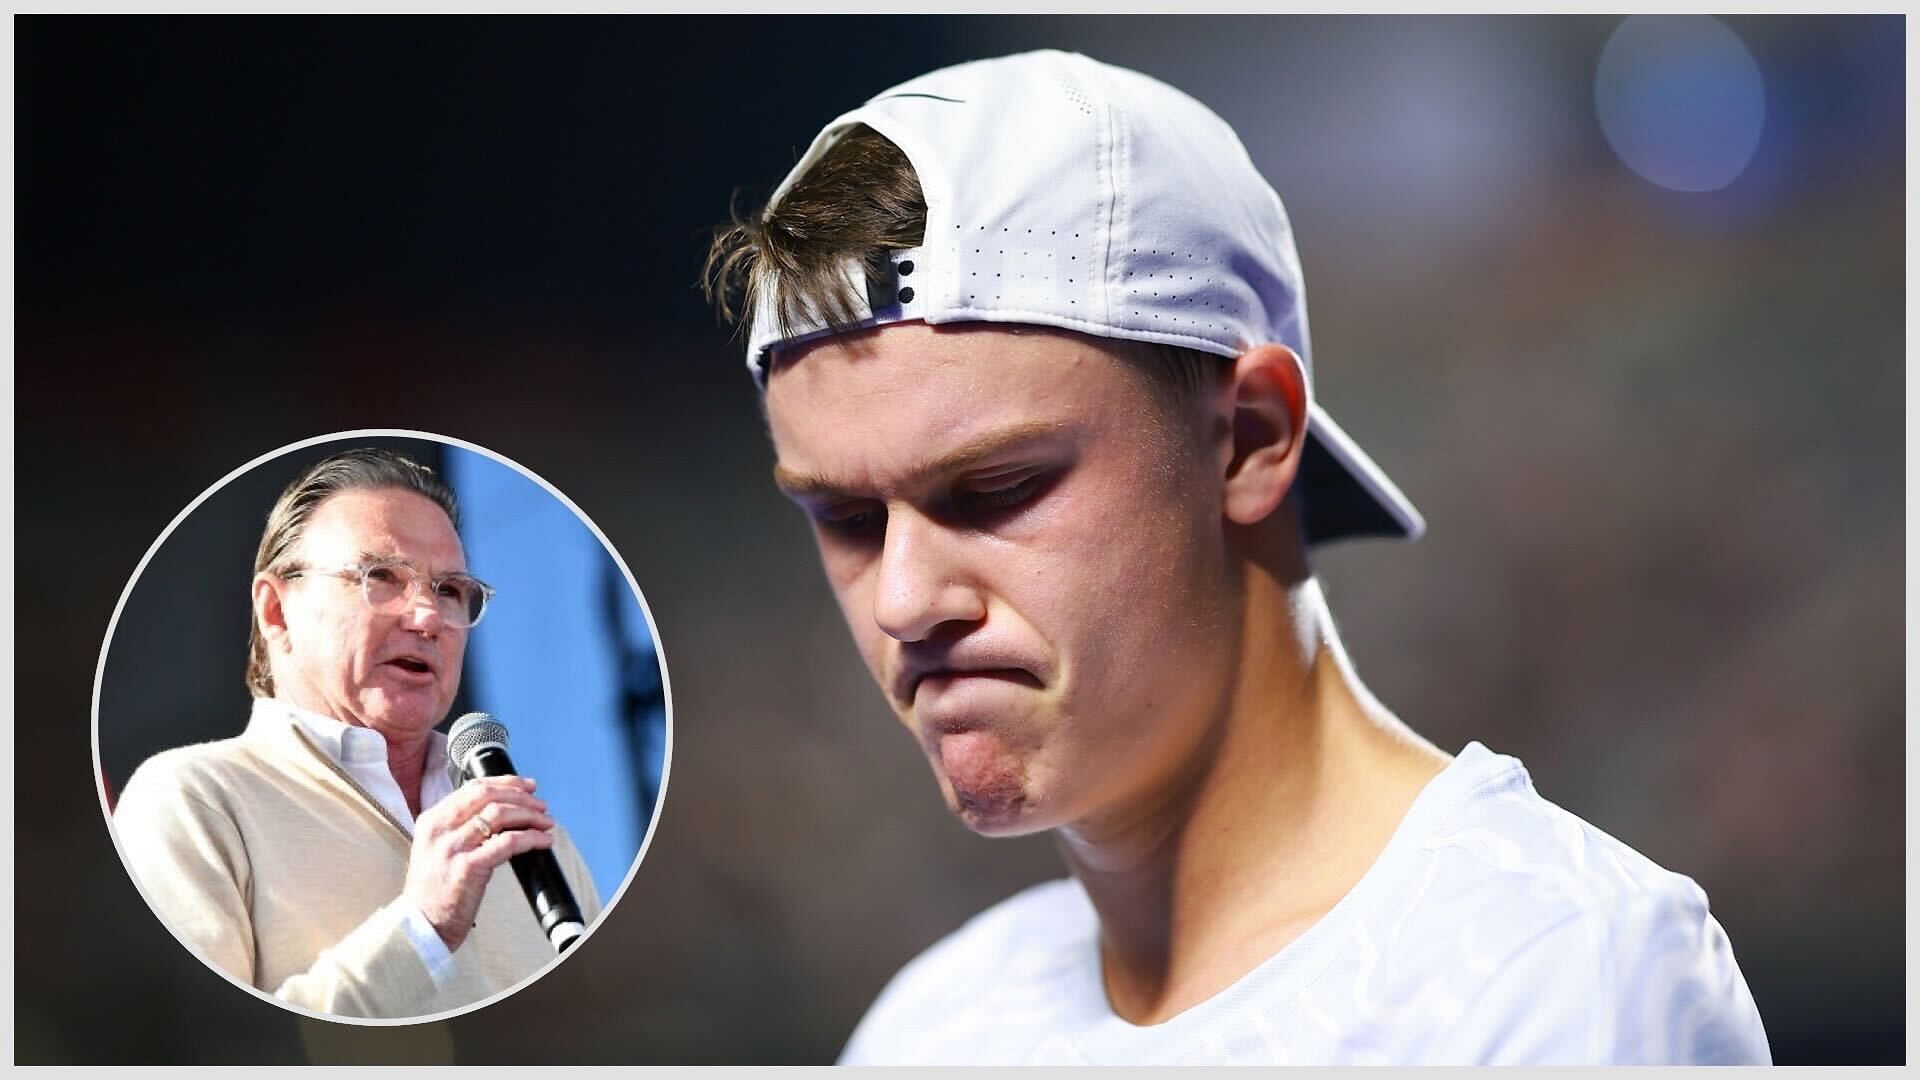 Jimmy Connors has sympathized with Holger Rune.